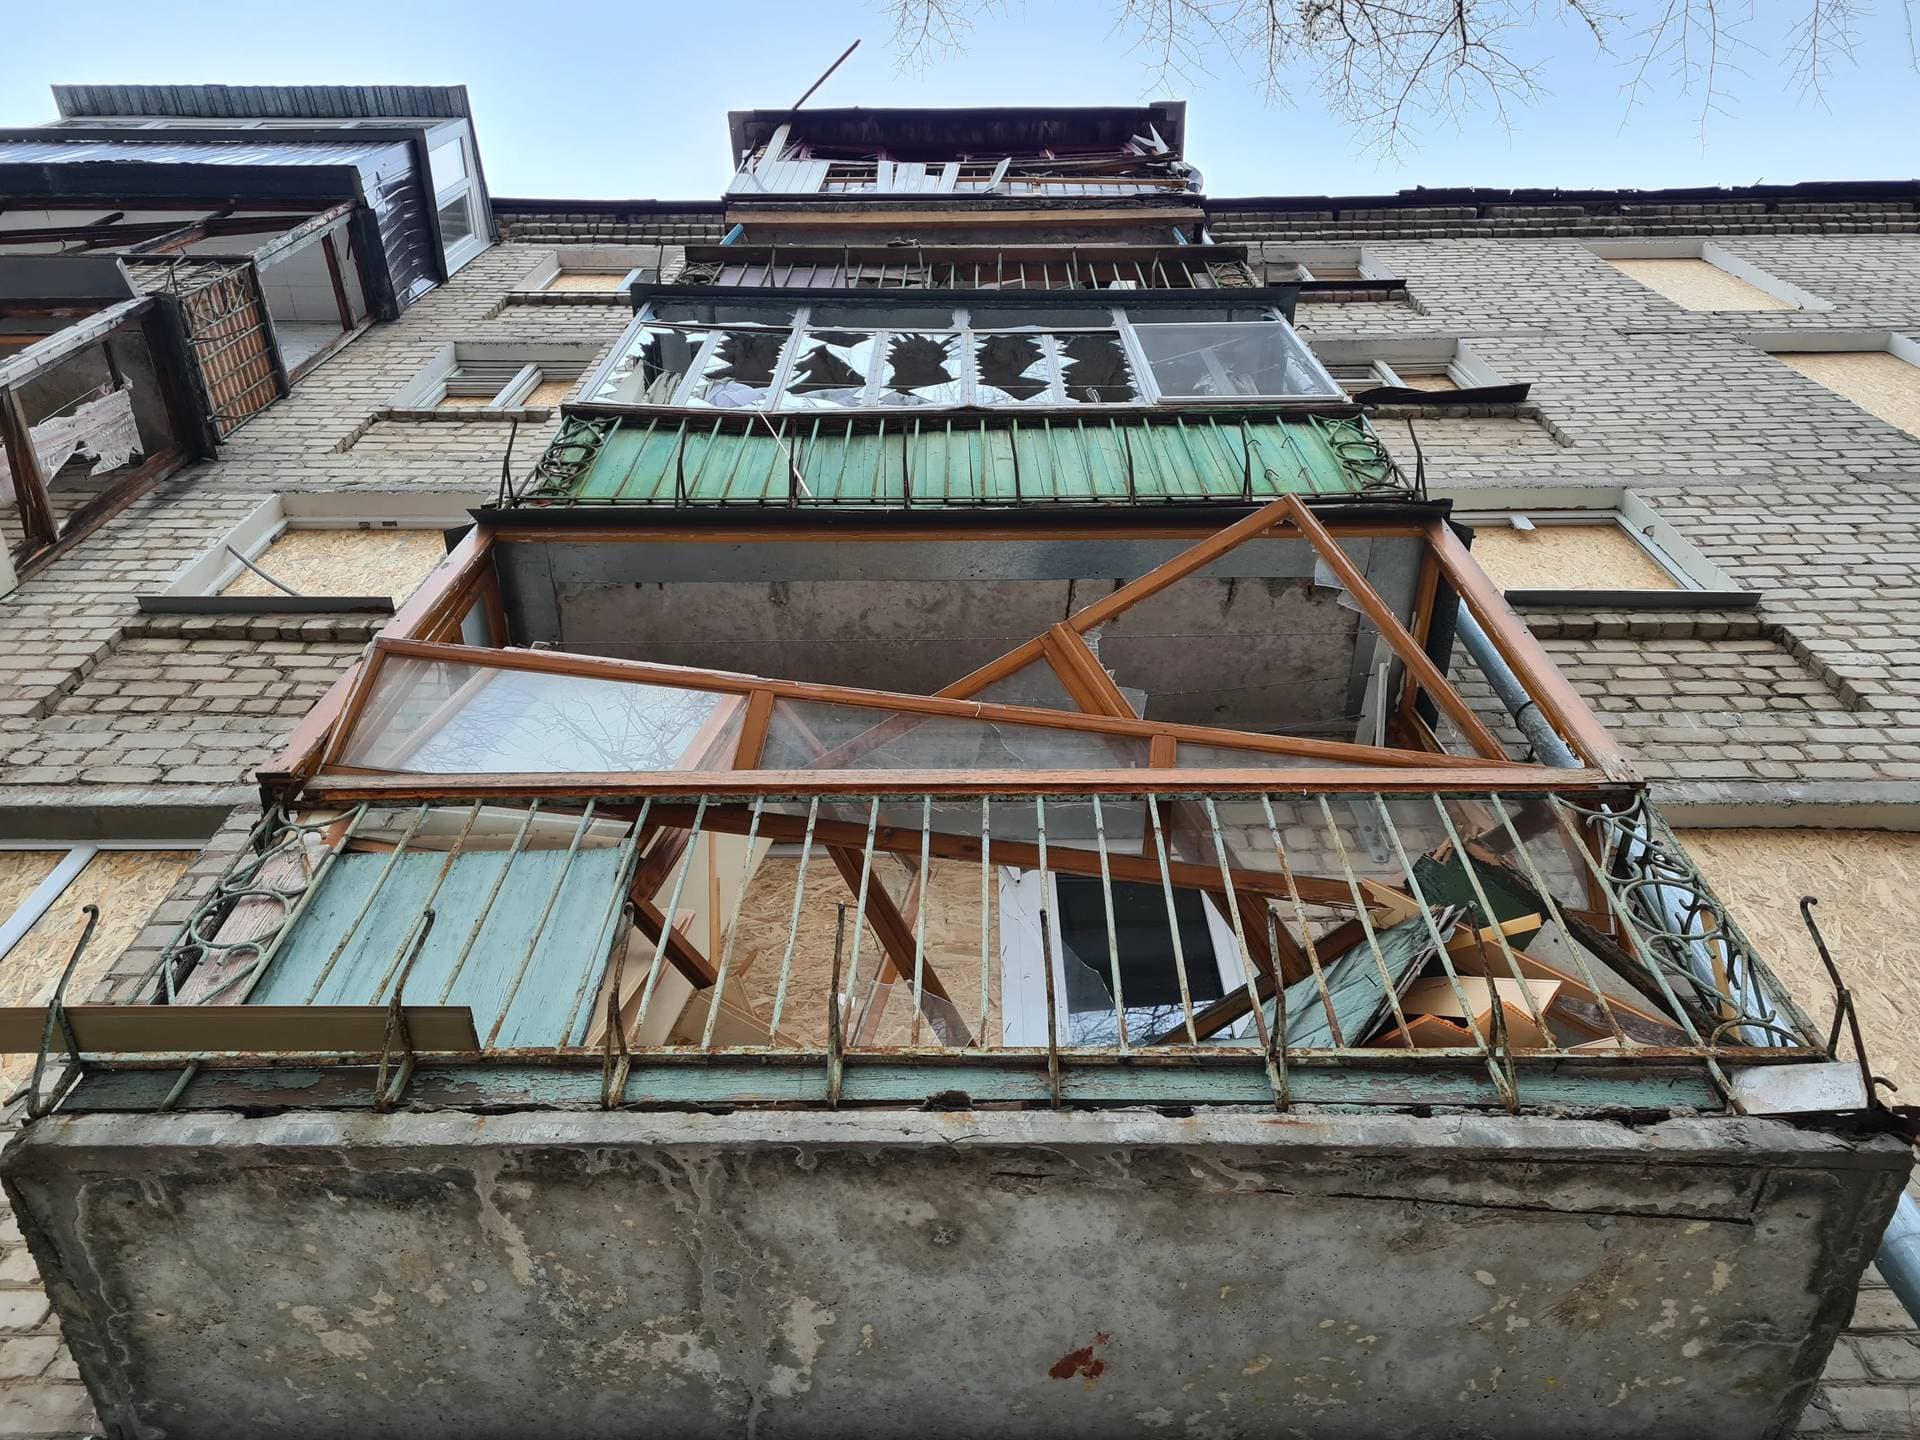 Ukrainians in Kharkiv dodge shards of glass and rush to survive when Russia intensifies shelling